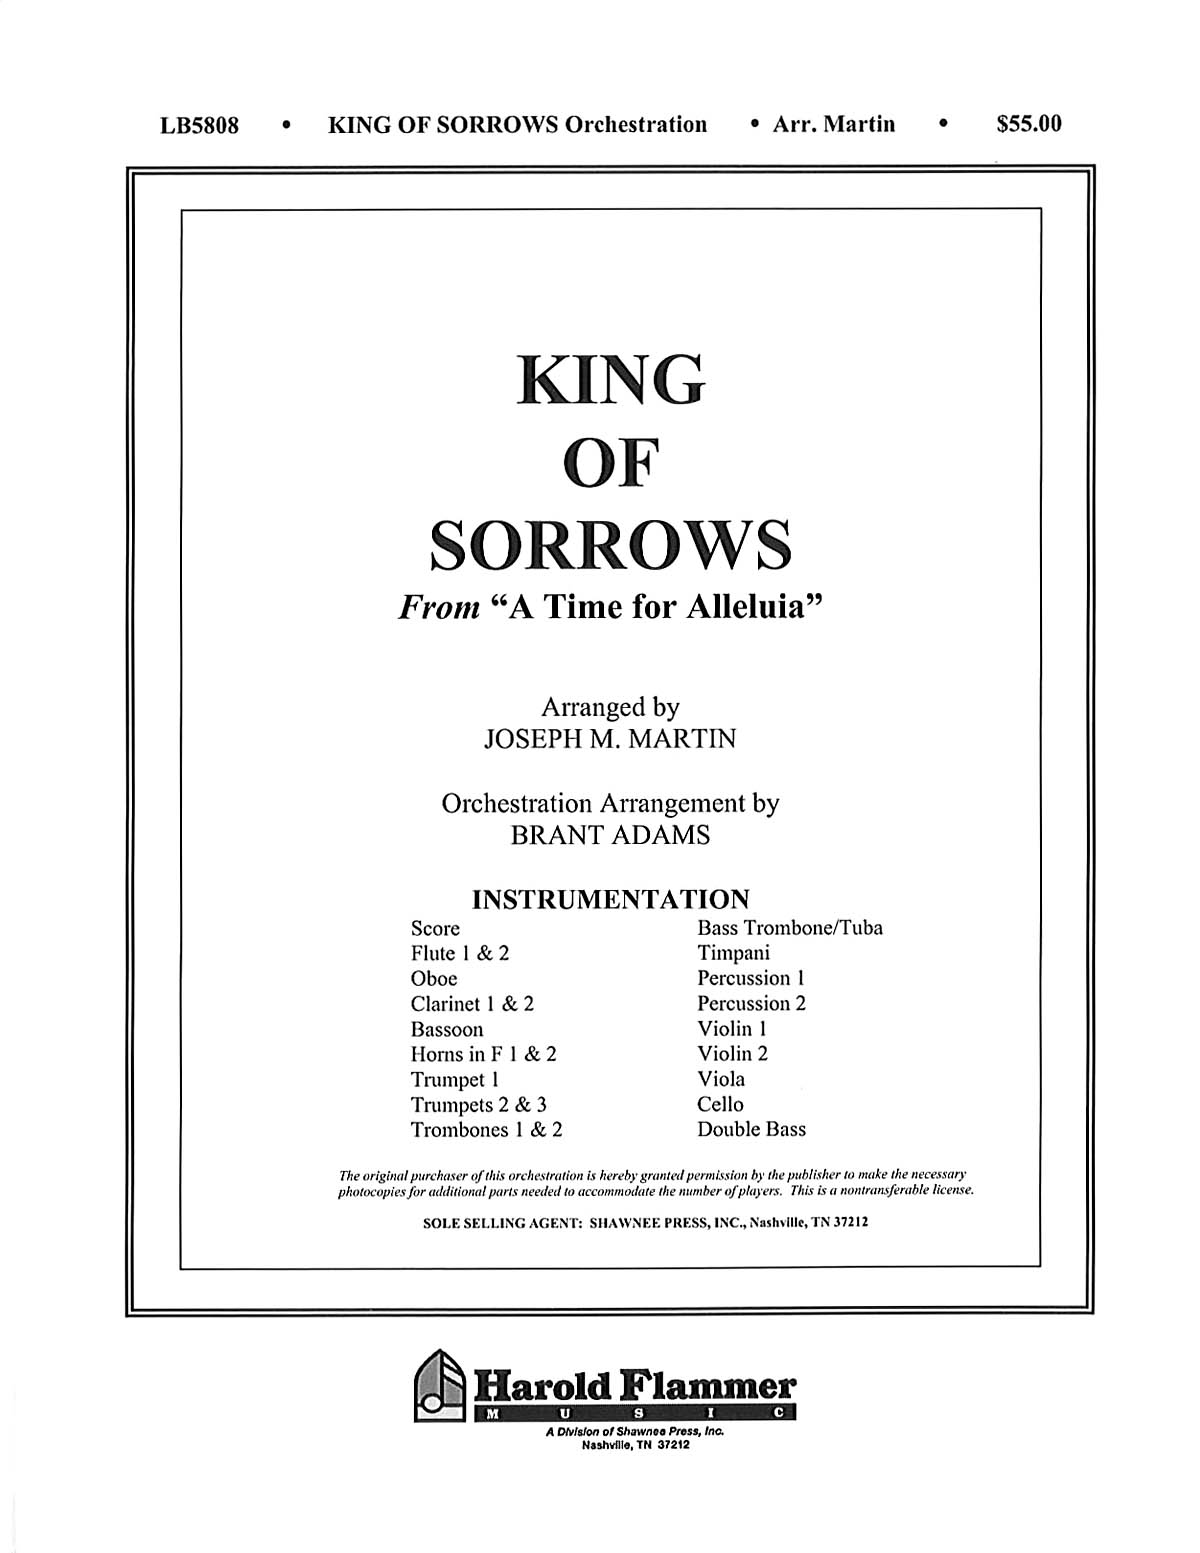 King of Sorrows from A Time for Alleluia